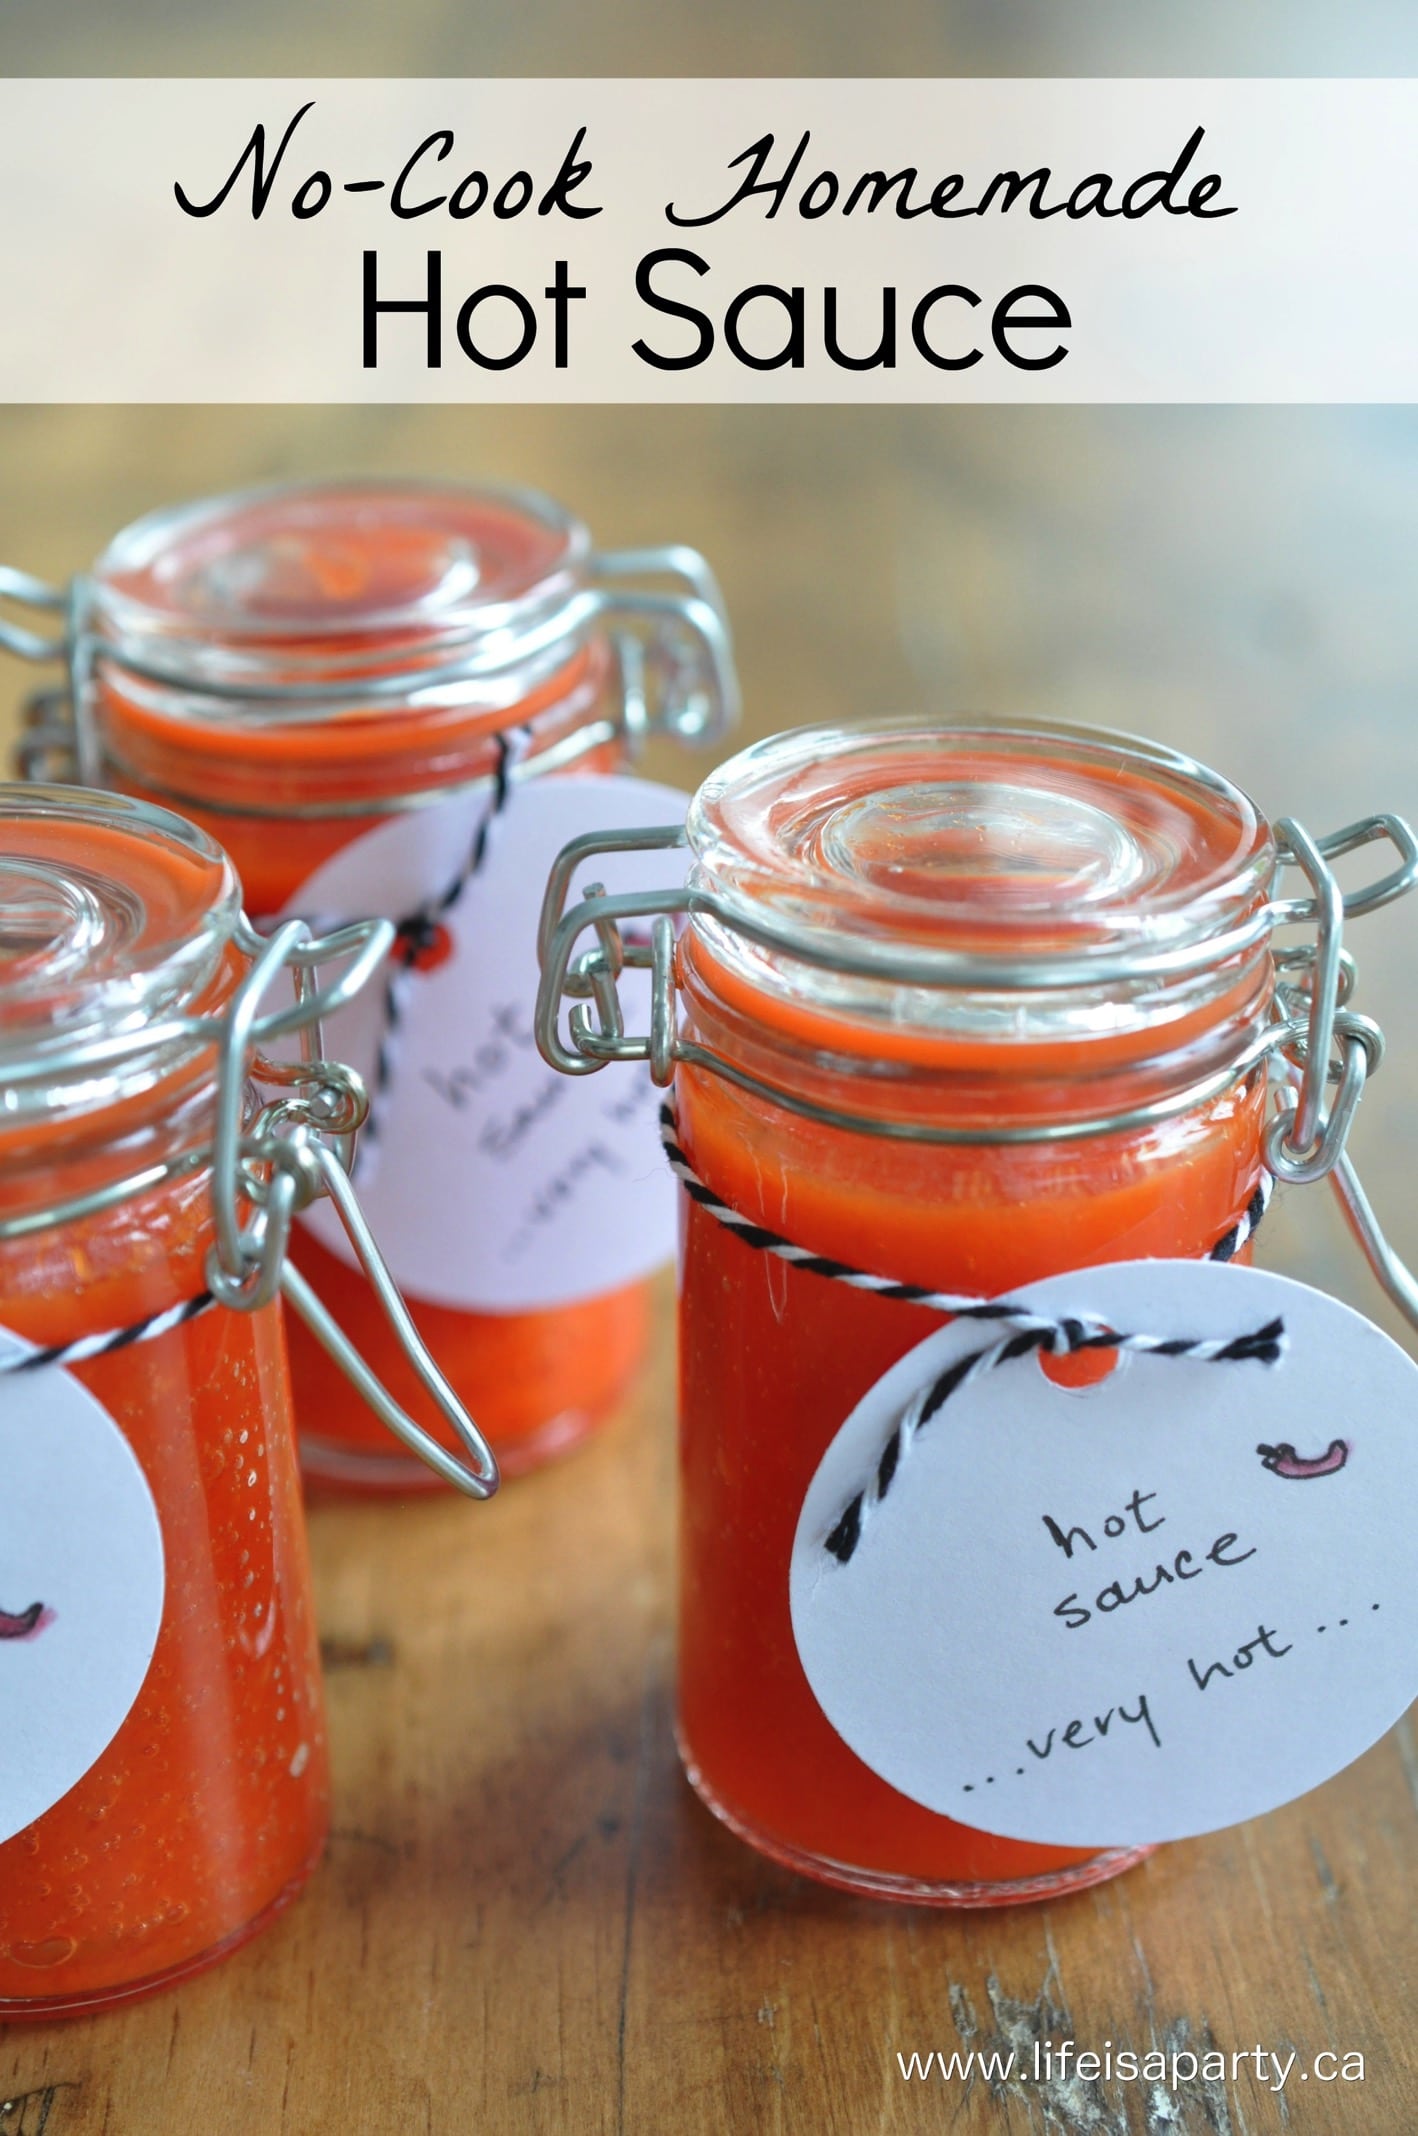 No Cook Homemade Hot Sauce: Make this sauce in minutes in your blender and enjoy the hot tangy homemade hot sauce. The perfect Homemade Father's Day gift.